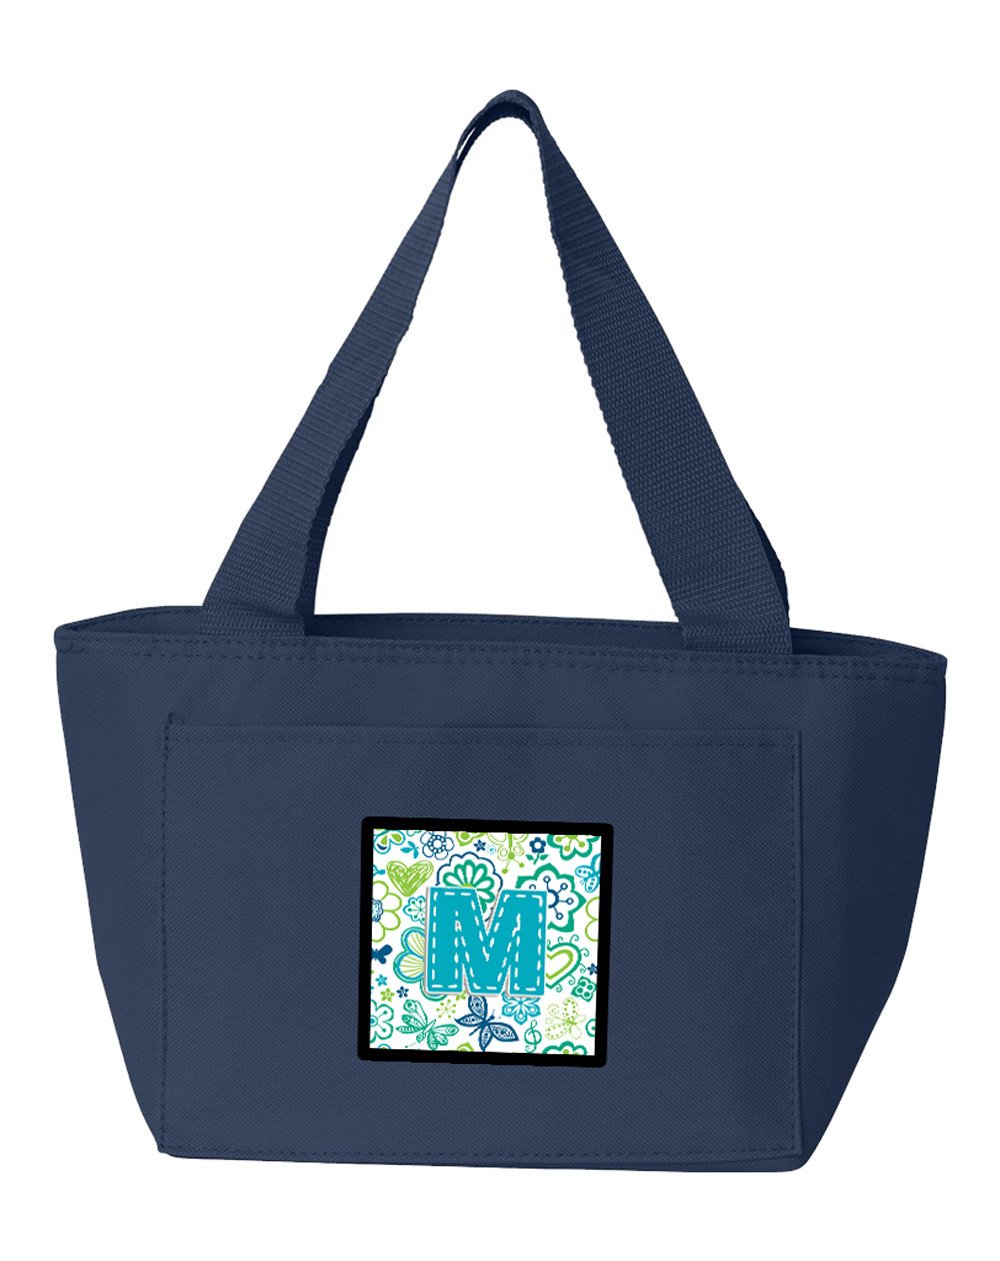 Letter M Flowers and Butterflies Teal Blue Lunch Bag CJ2006-MNA-8808 by Caroline's Treasures